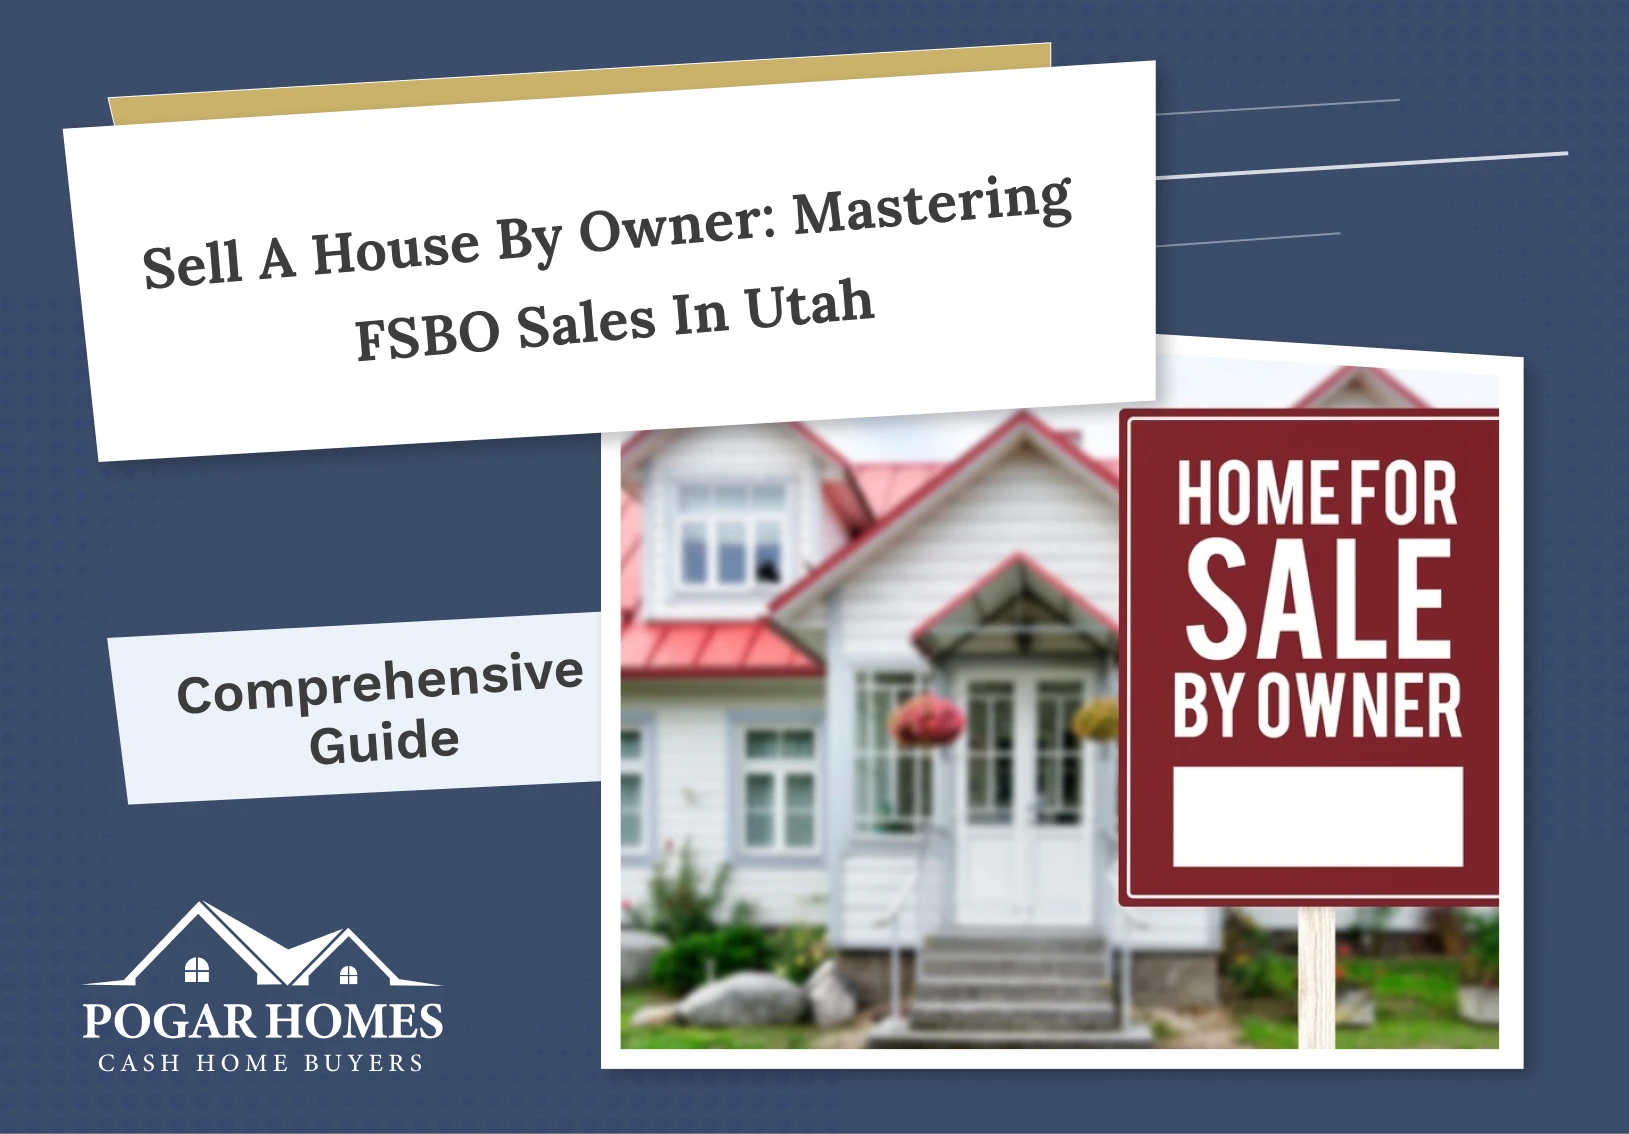 Sell a House by Owner: Mastering FSBO Sales in Utah 